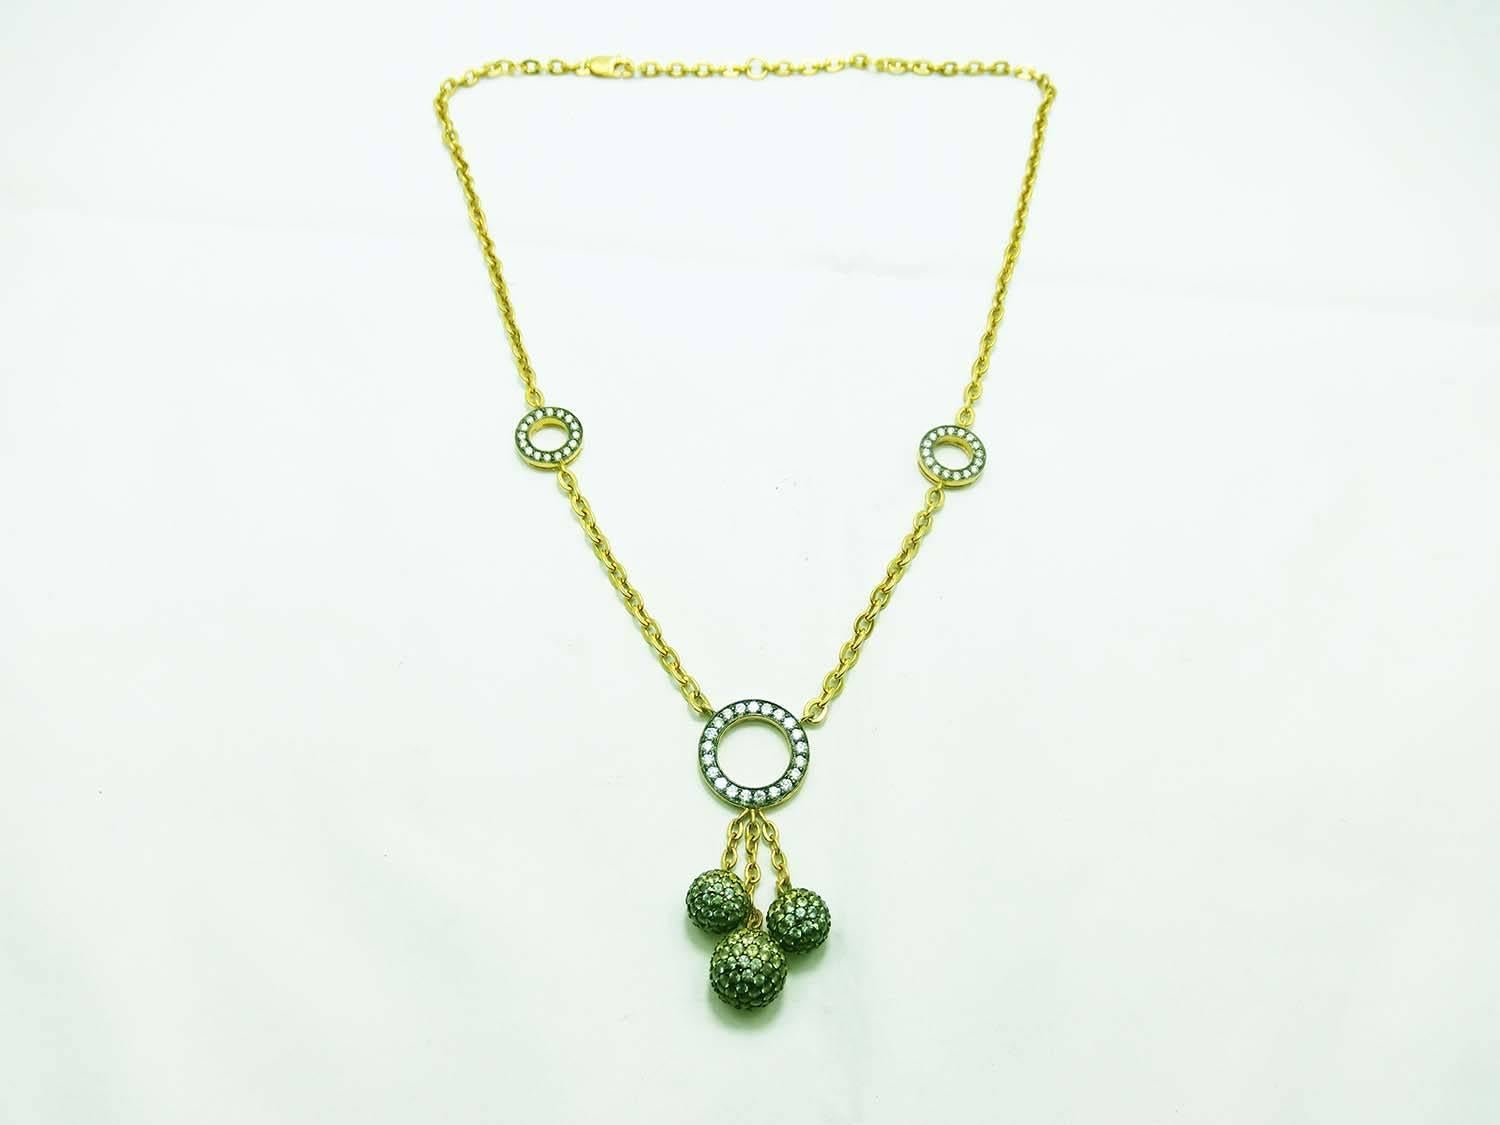 3 Balls Necklace made in 18k Yellow gold .We design as the harmony symbolic.
Green and Yellow Sapphire 4.18 ct
Diamond 0.91 ct H VS quality 
The length is 16.5 inches but you can use as 15 inches,16 inches and 16.5 inches .Because we have a small